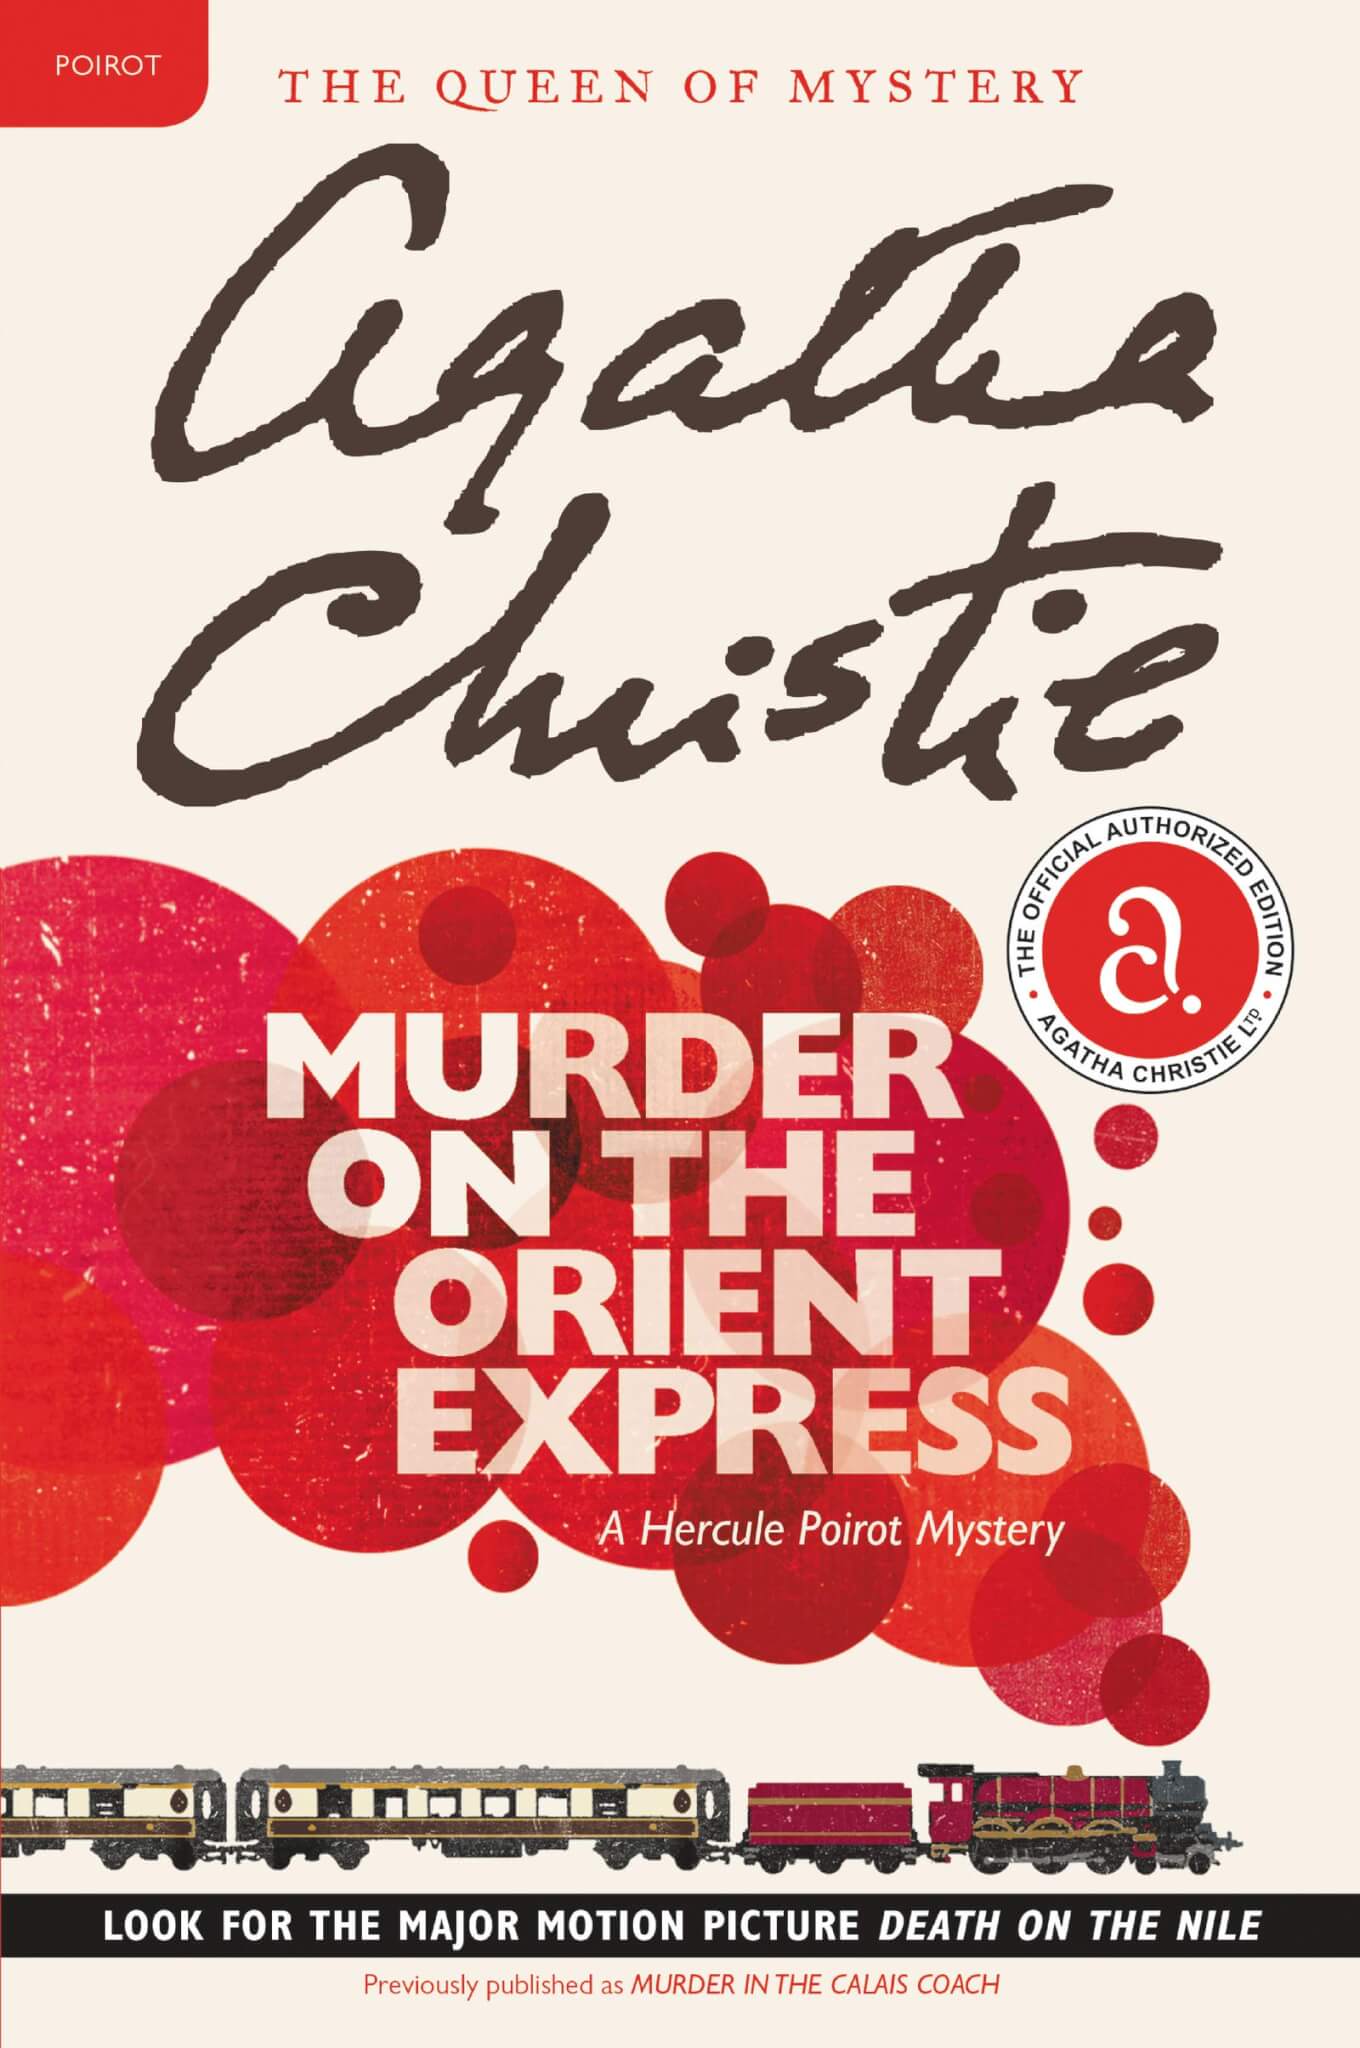 "Murder on the Orient Express" by Agatha Christie